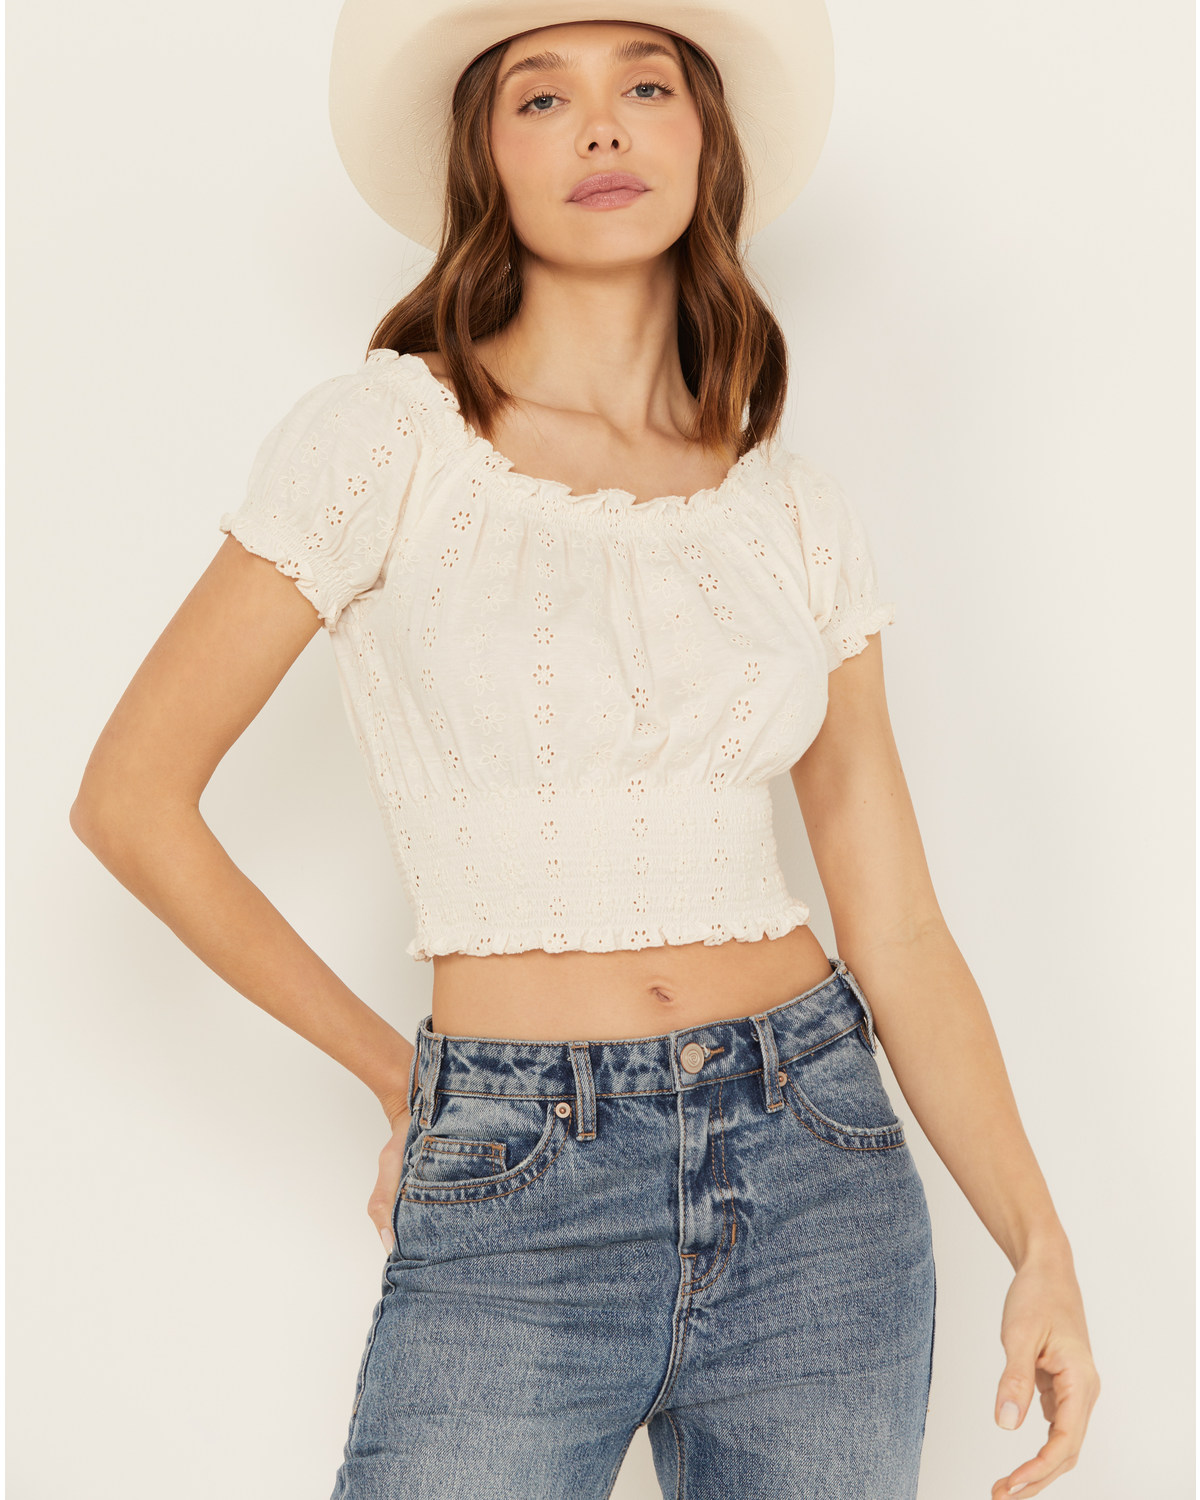 Cleo + Wolf Women's Knit Eyelet Smocked Crop Top